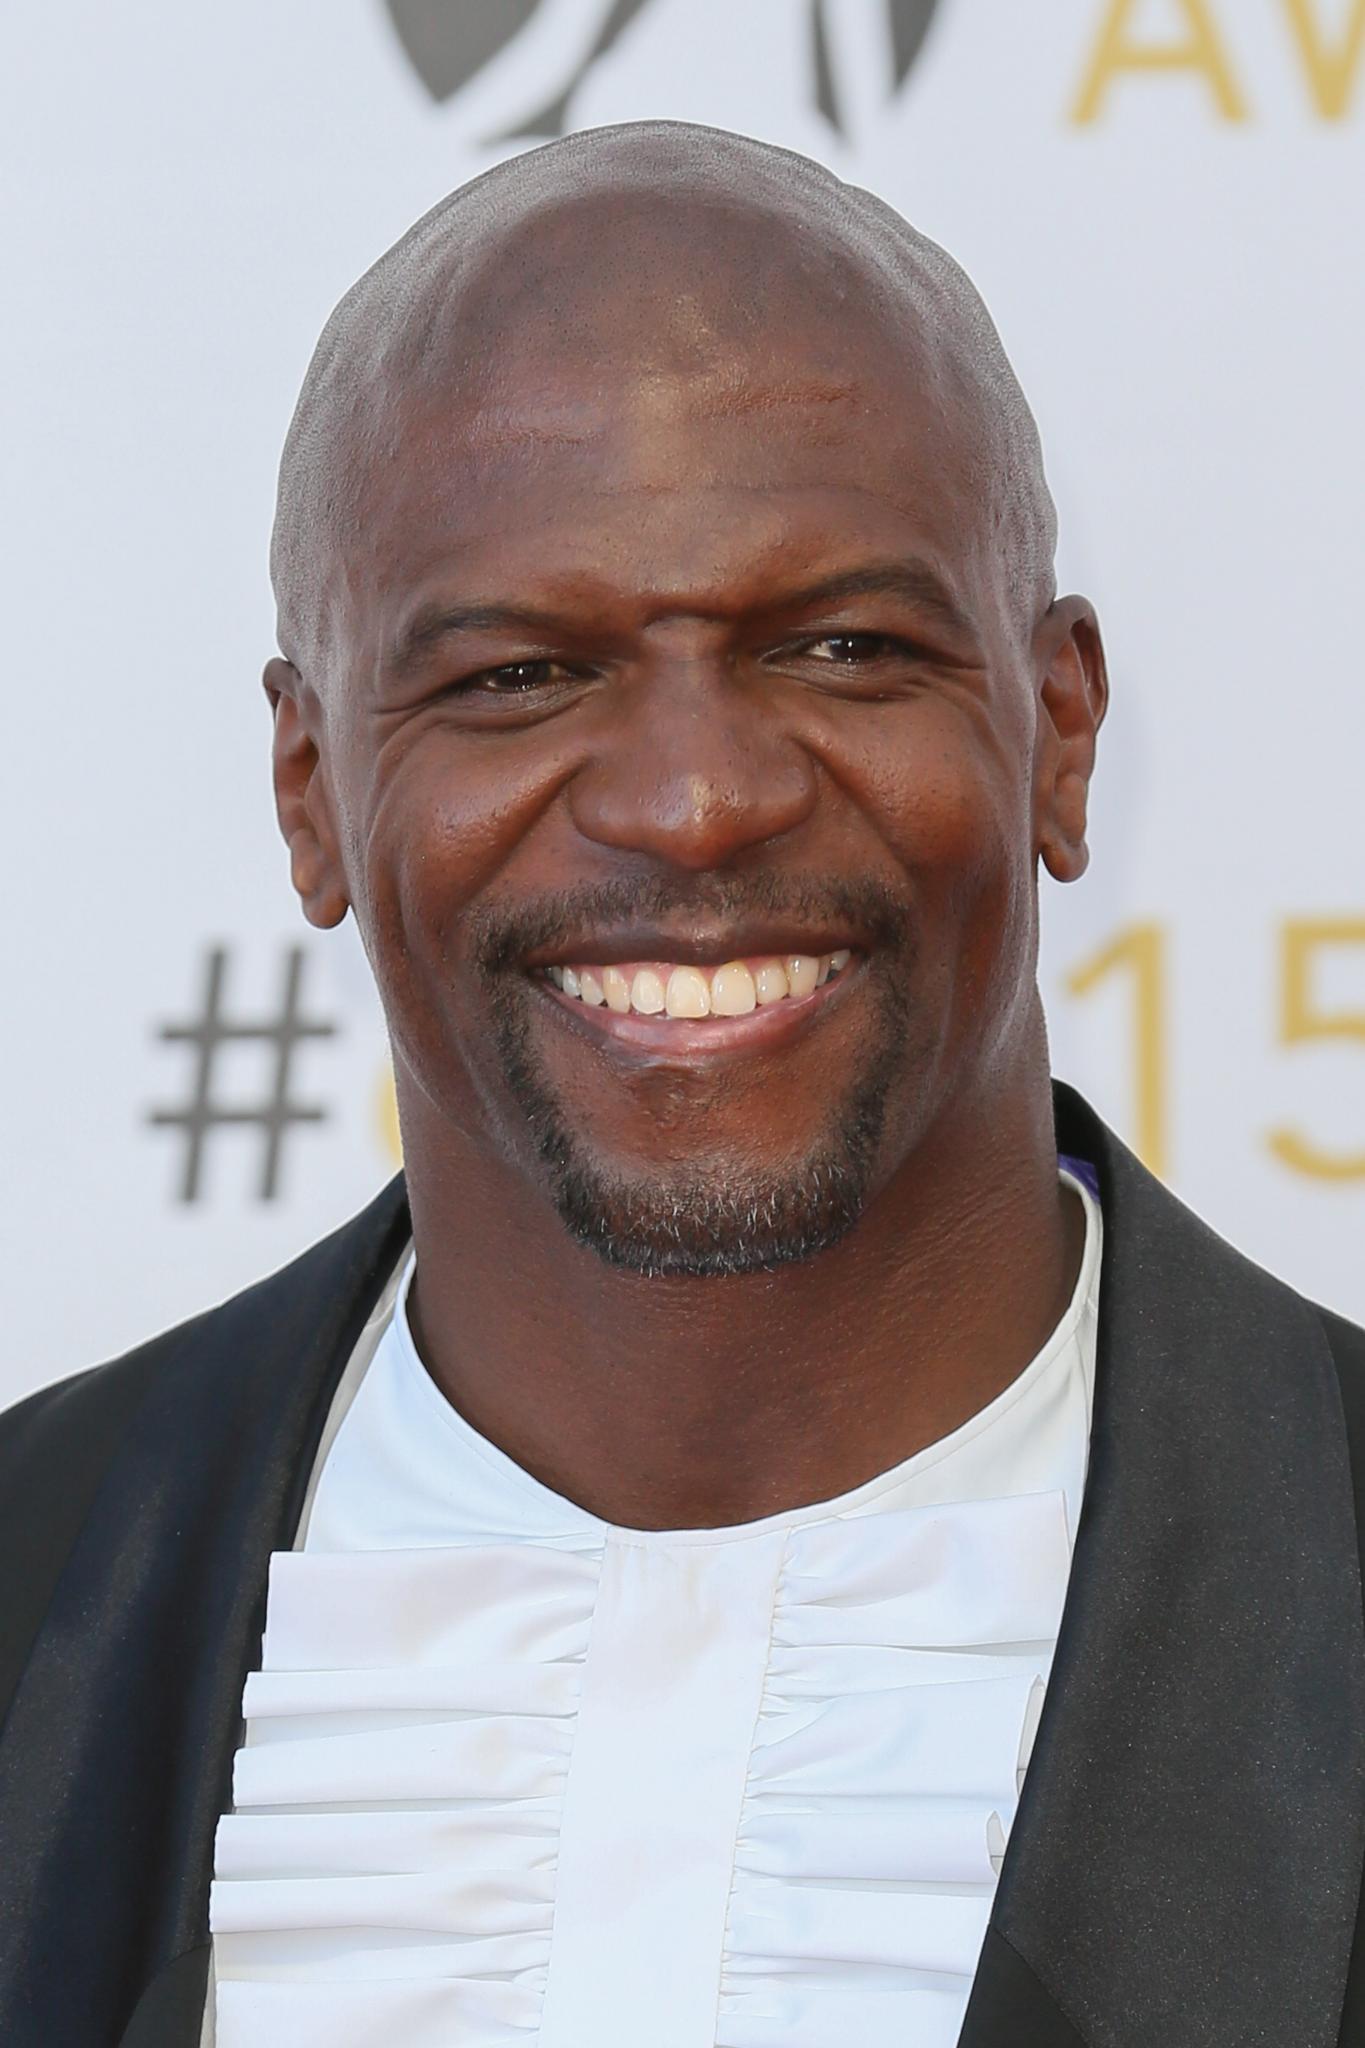 Terry Crews Opens Up About The Porn Addiction That Almost Ruined His Marriage